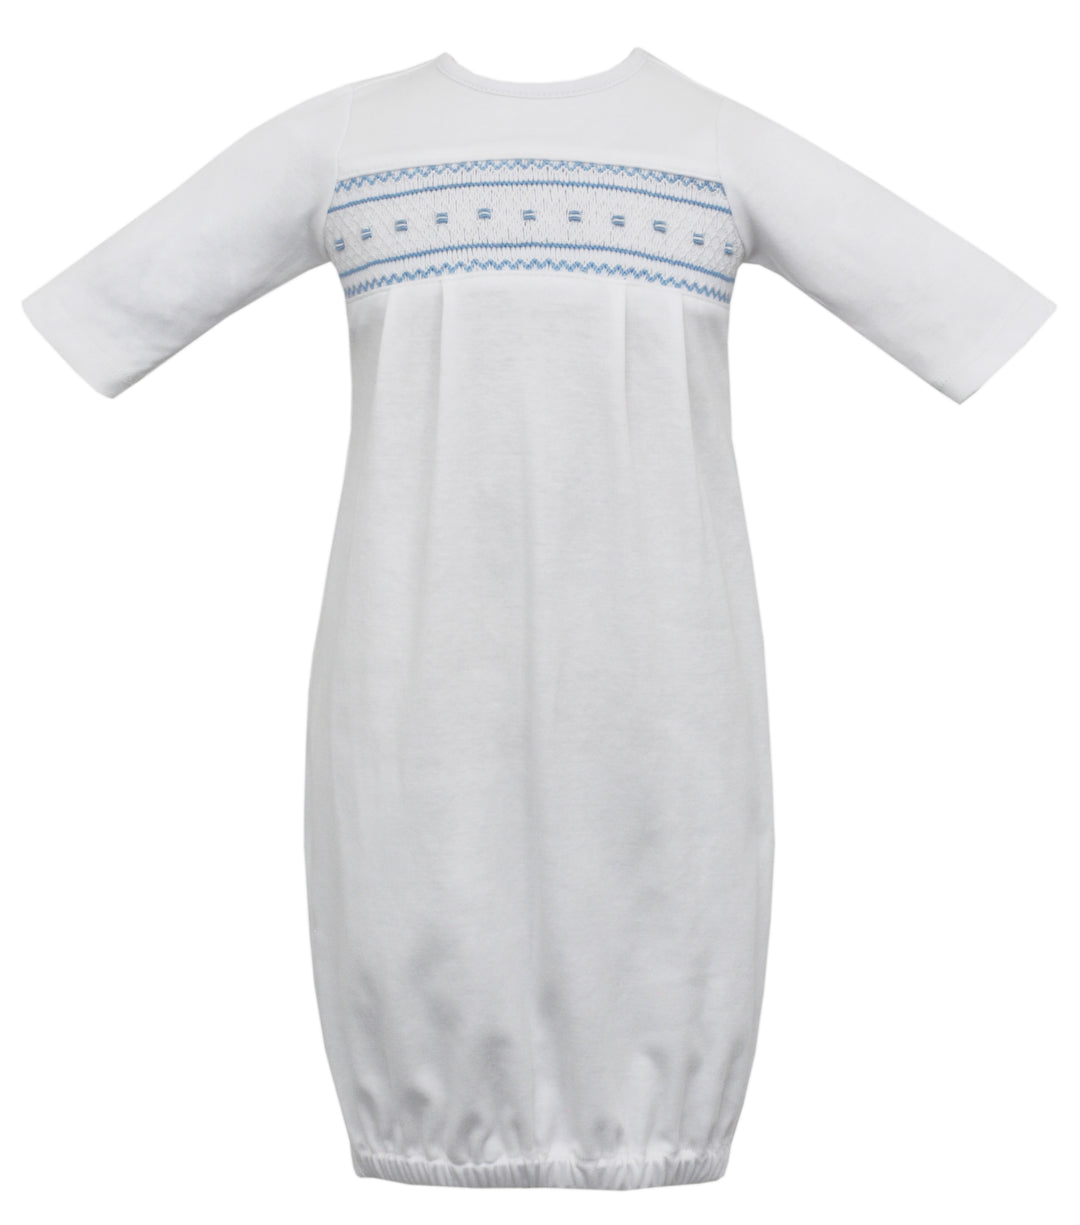 Boy's Gown- White Knit With Blue Geometric Smocking